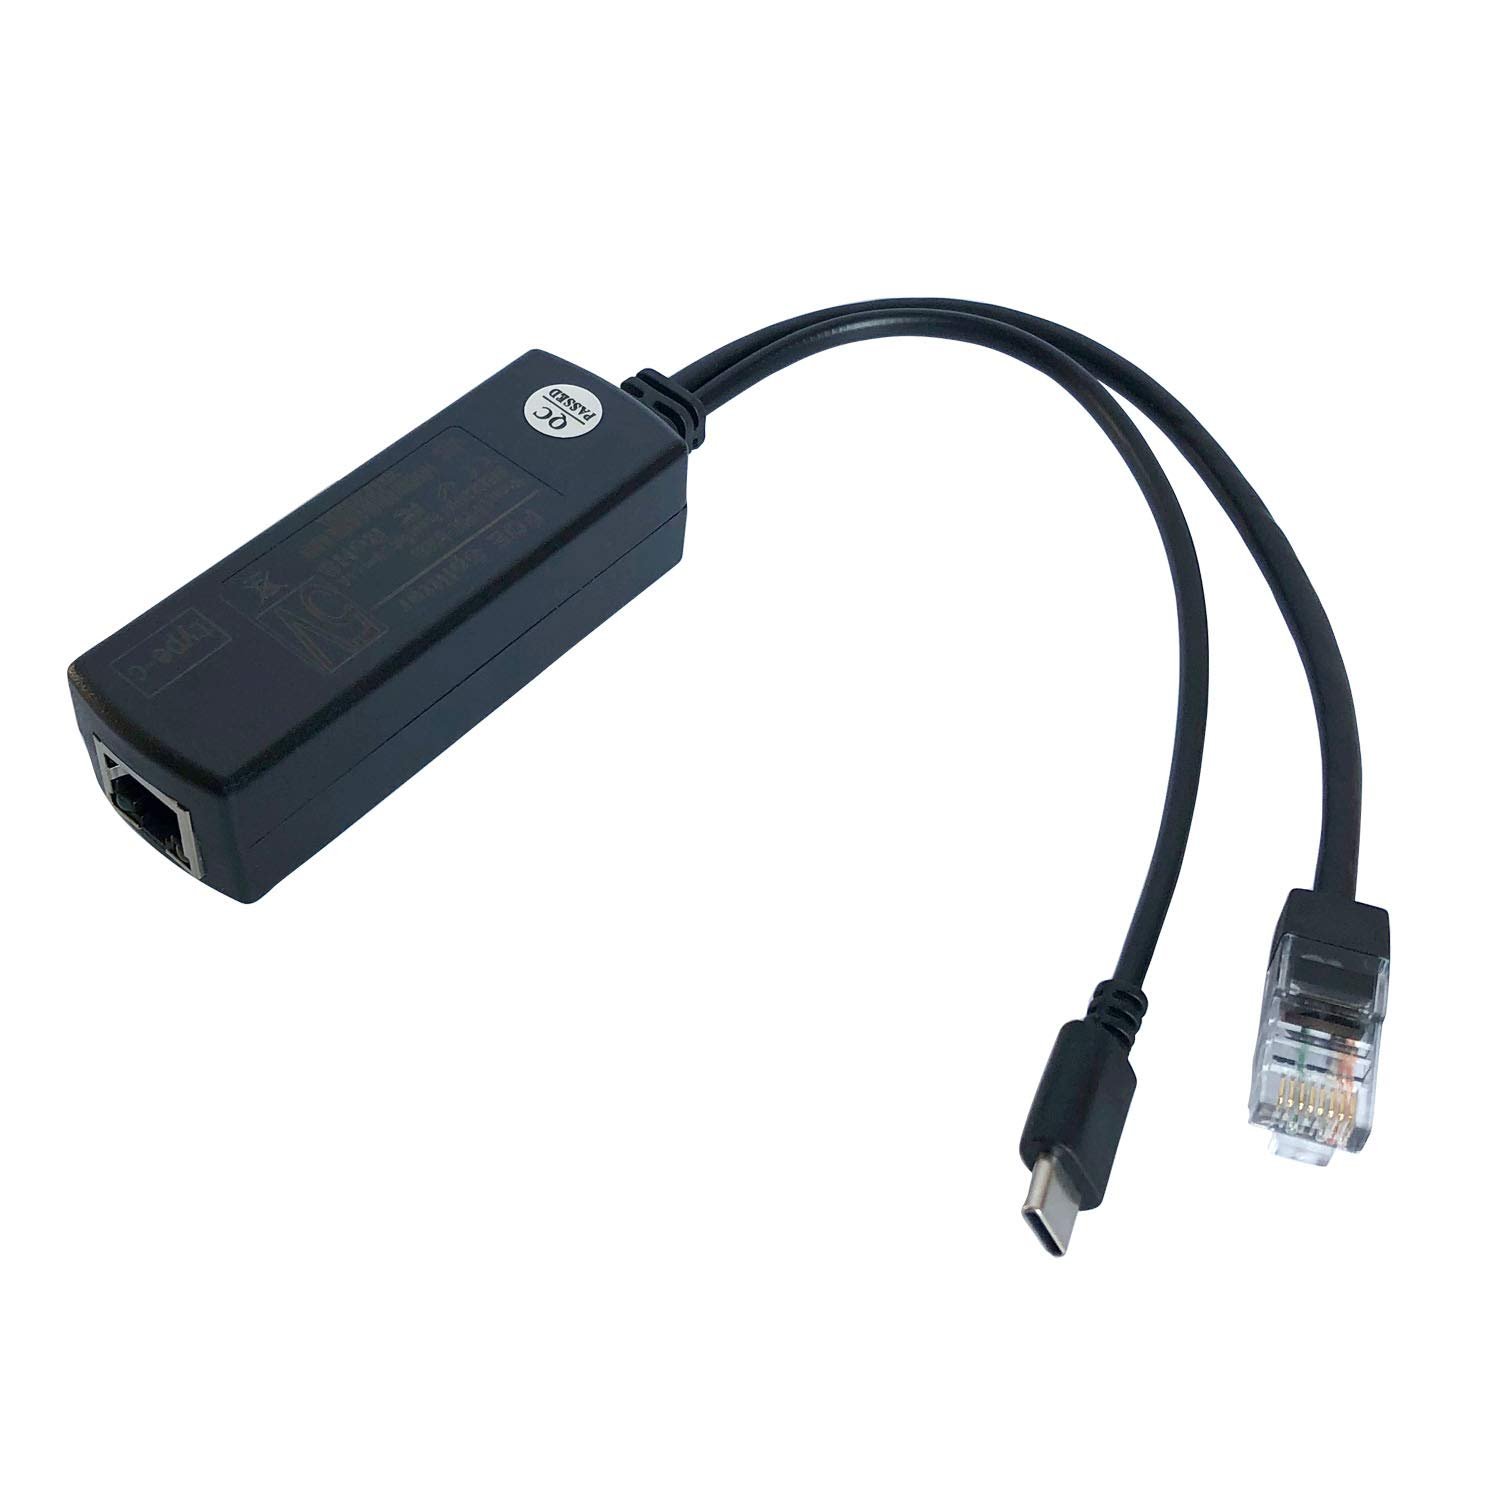 Poe Splitter Usb-C 5V - Active Poe To Usb-C Adapter, Ieee 802.3Af Compliant For Raspberry